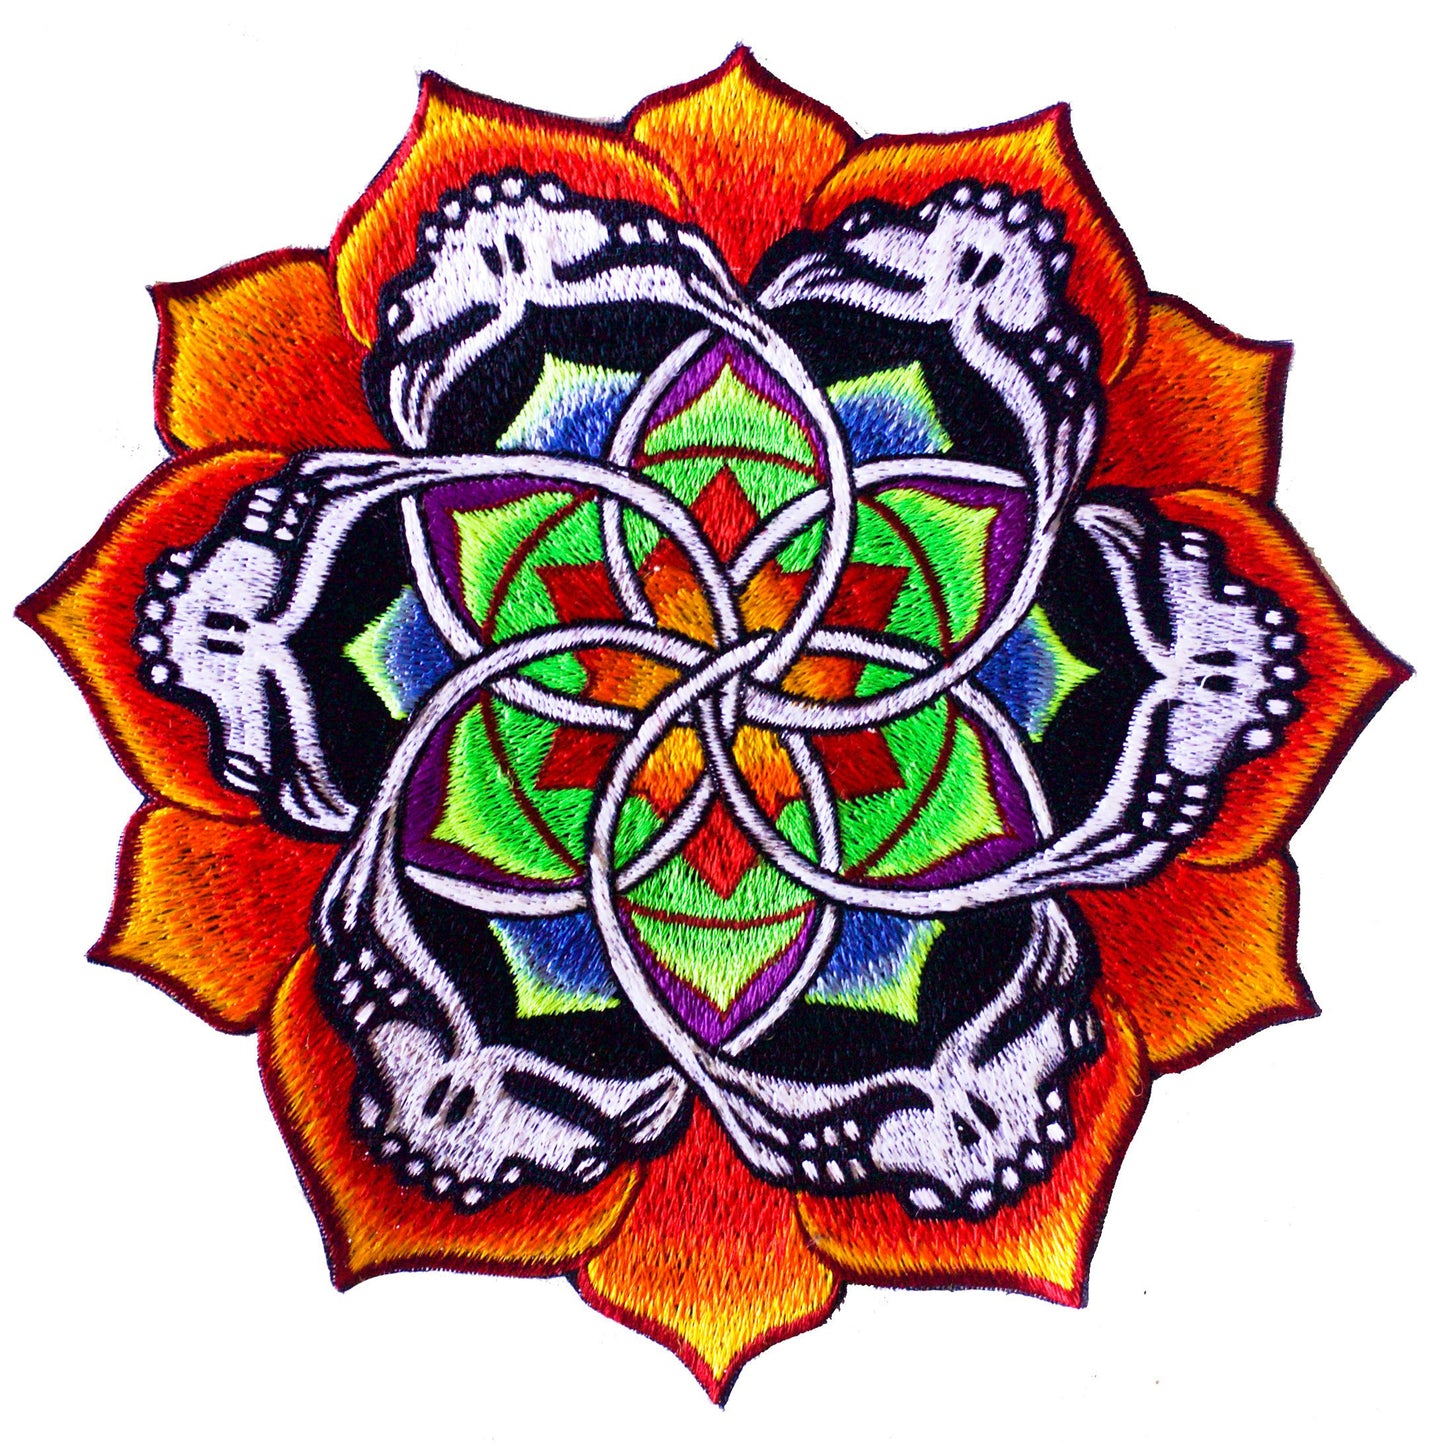 Grateful Flower of Life Mandala embroidery patch psychedelic art skull yantra